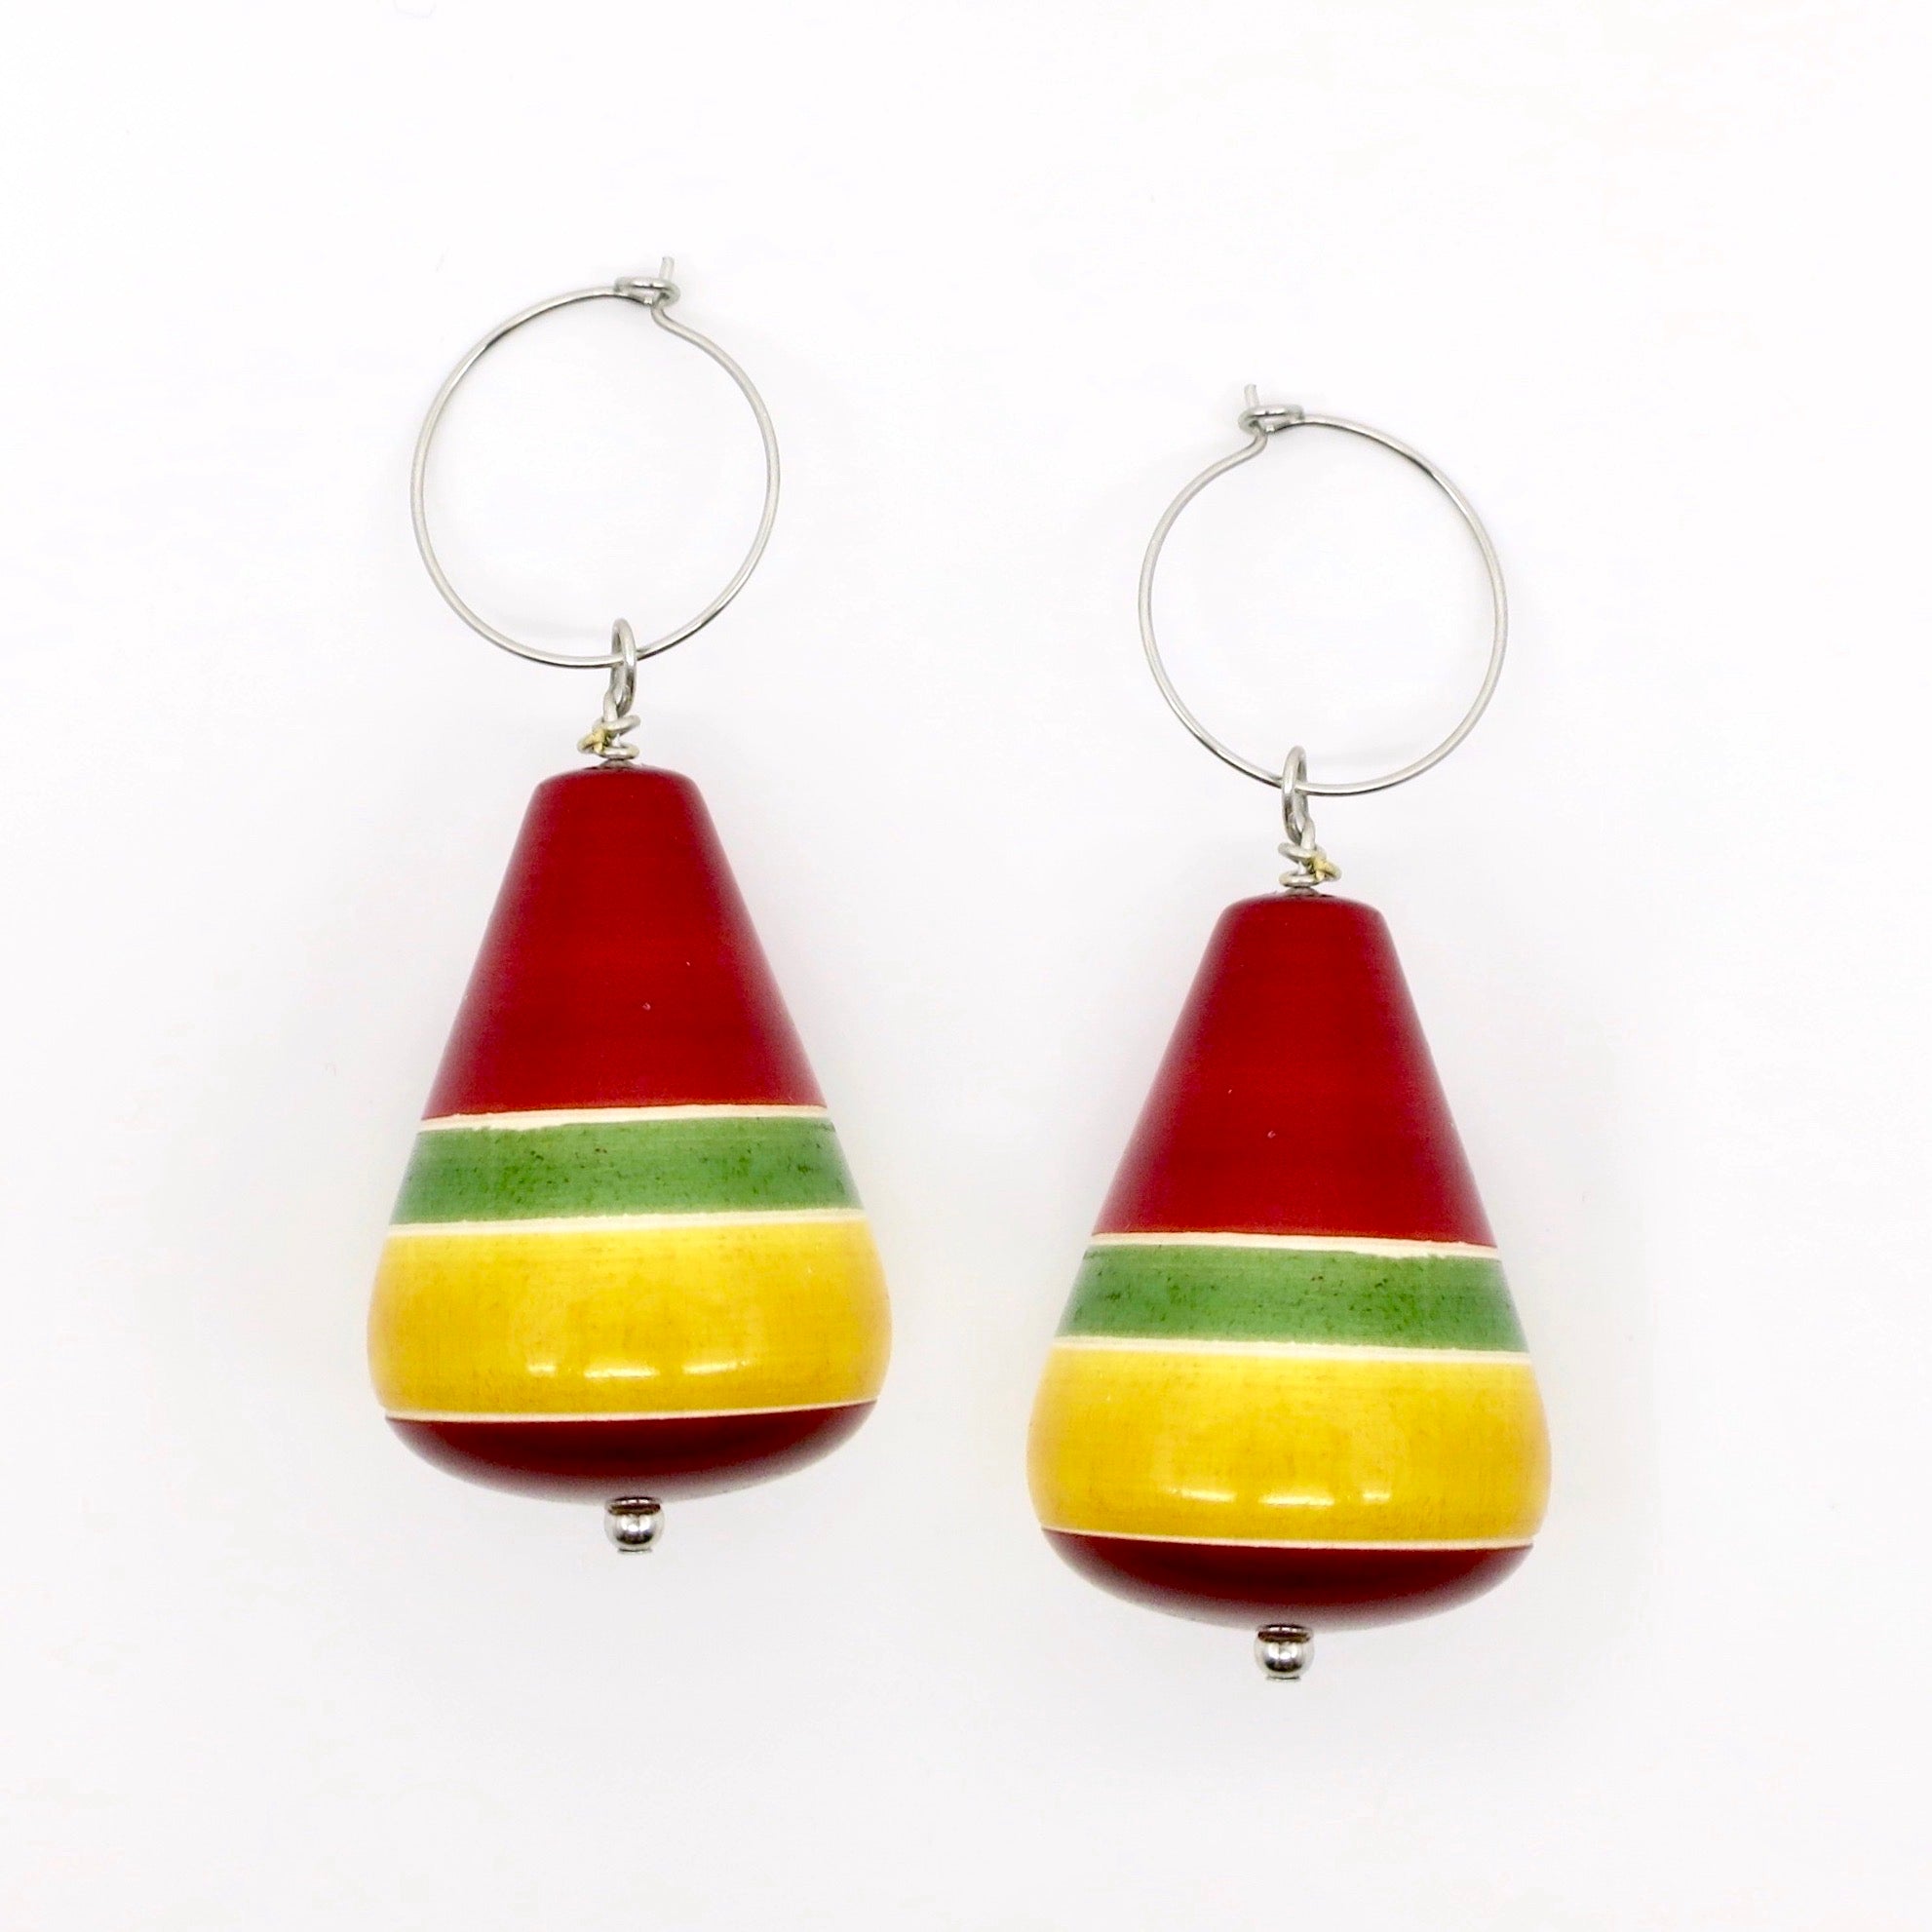 Banded Love earrings (available in 4 different colors) - Craft Stories